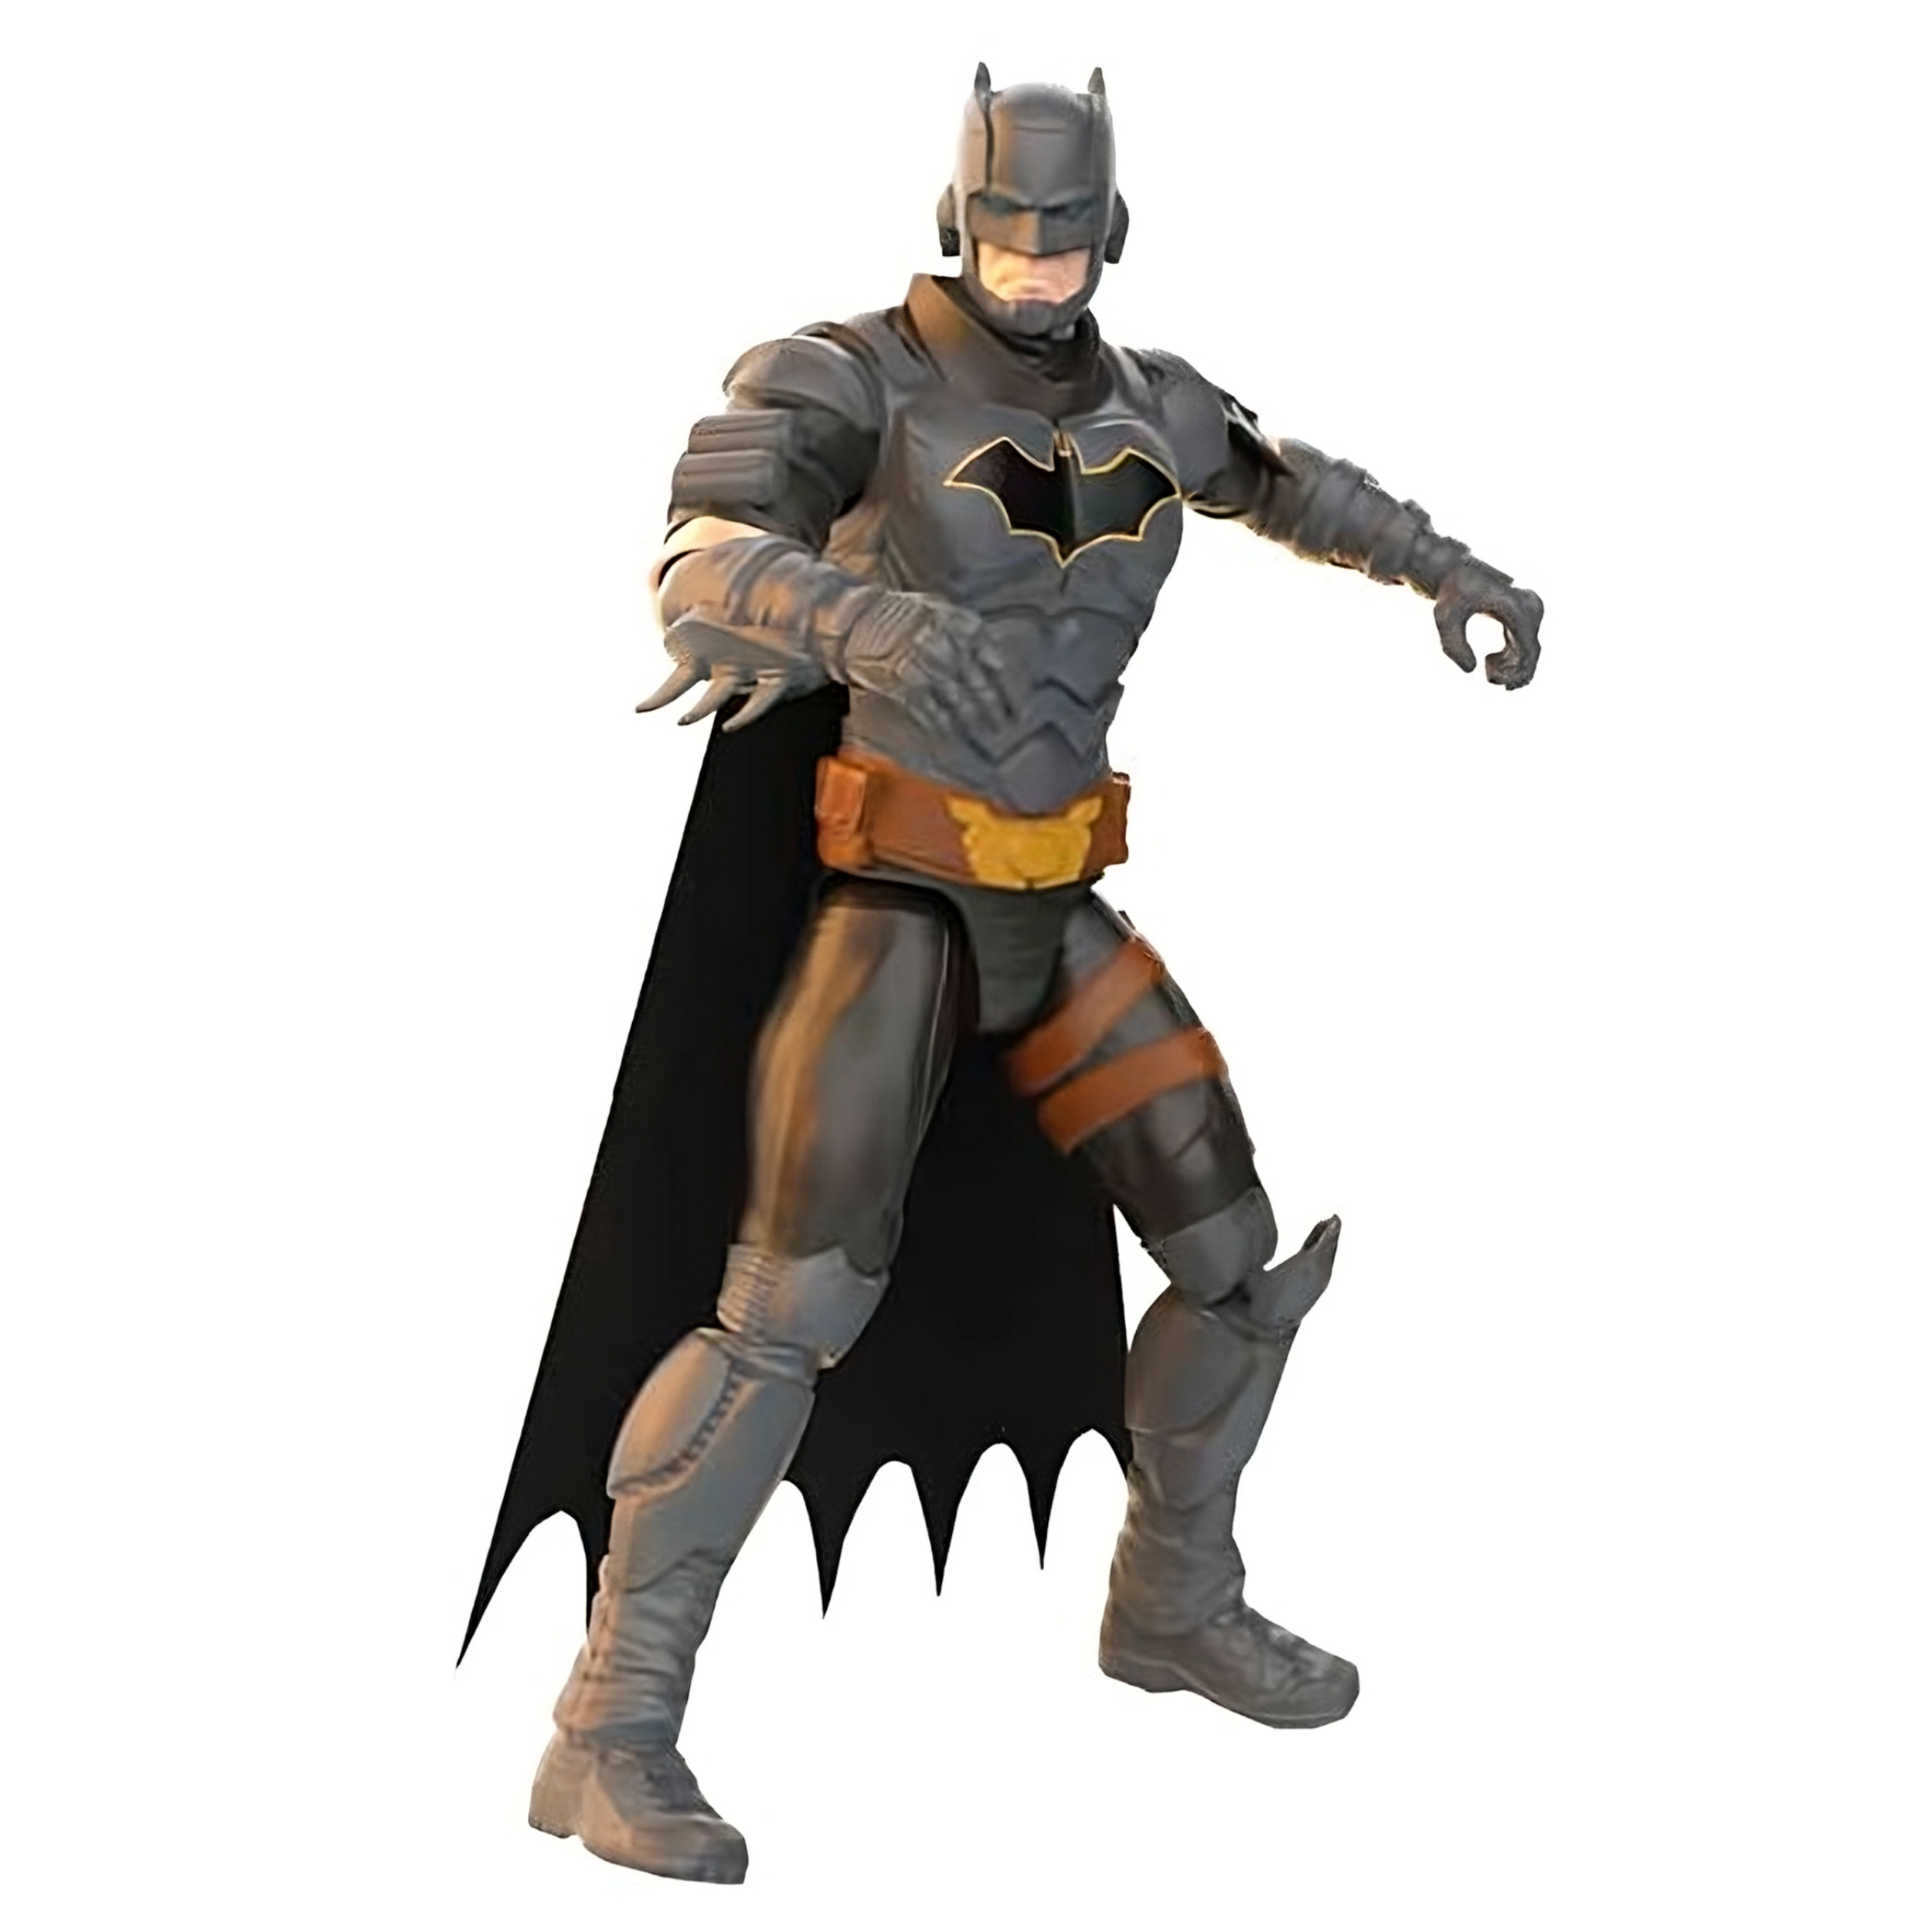 DC Comics, 12-inch Batman Action Figure, Kids Toys for Boys and